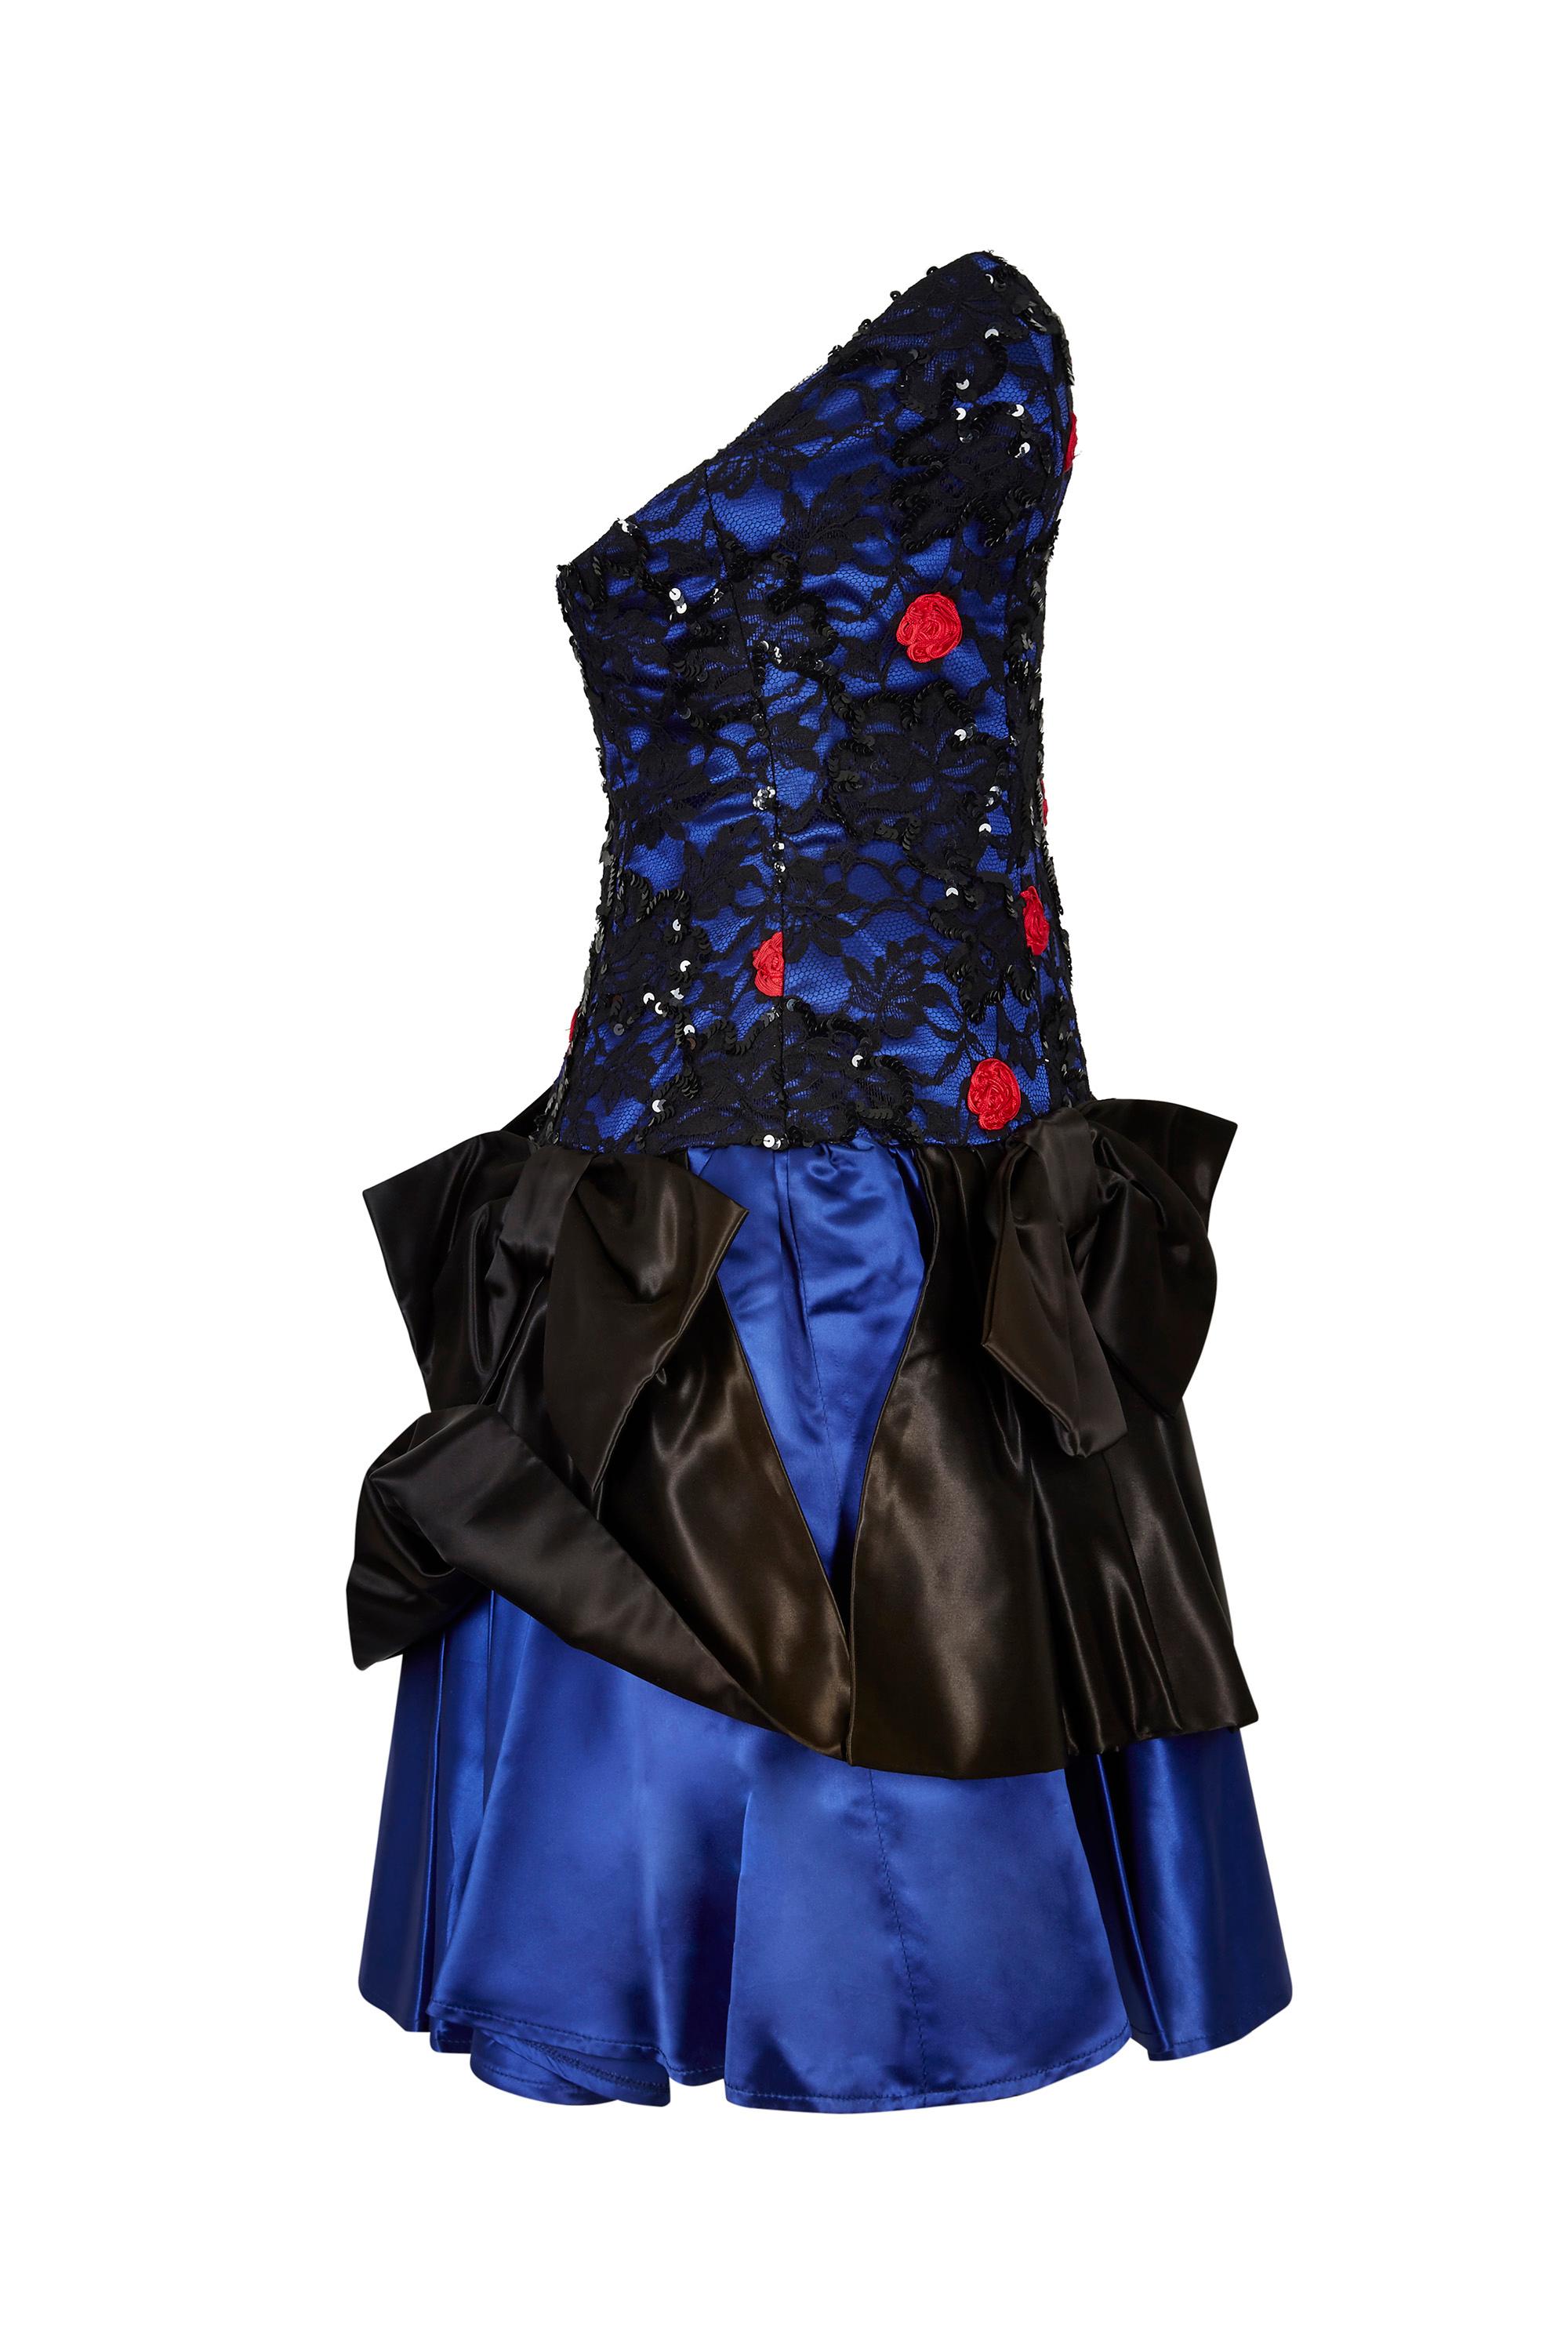 This vivacious late 1980s sateen and lace cocktail dress in cobalt blue is by the famous London boutique Roots and is playful, dynamic and in excellent vintage condition.  Sadly the boutique which was located in fashionable Chelsea, closed its doors